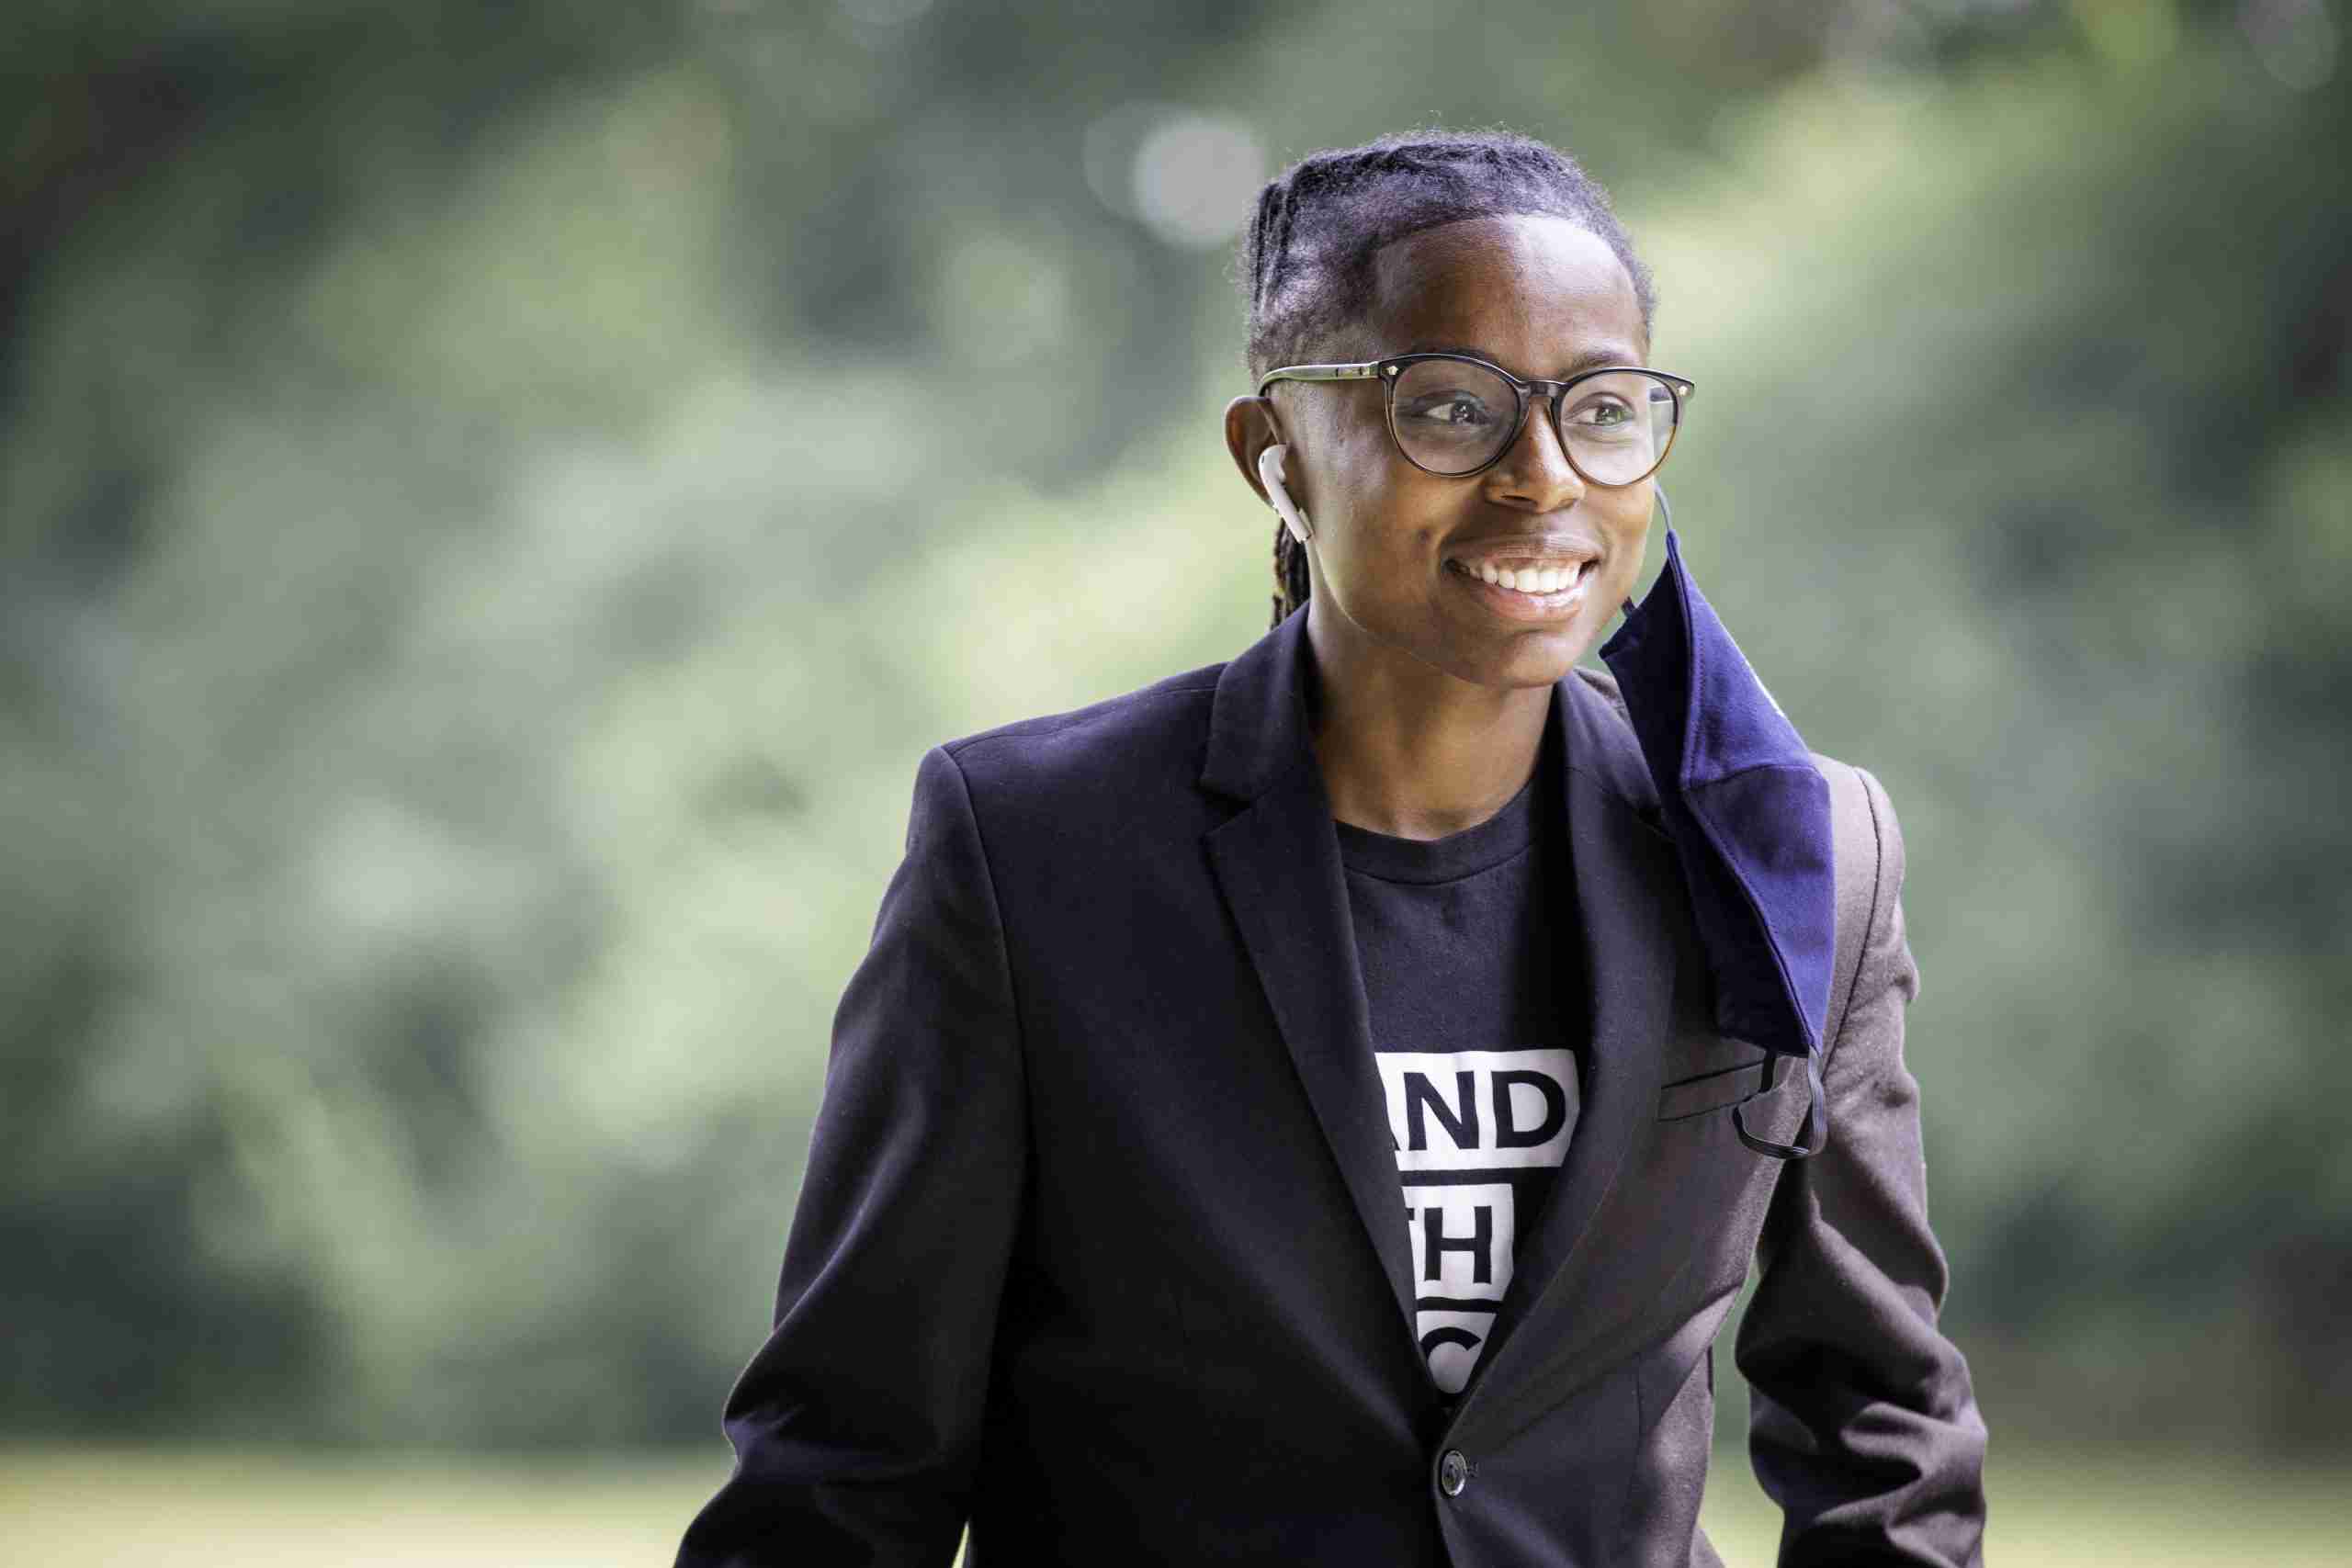 Belinda Drake, a 35-year-old queer, Black woman who ran for Indiana State Senate in District 32 (Indianapolis) in the latest election.